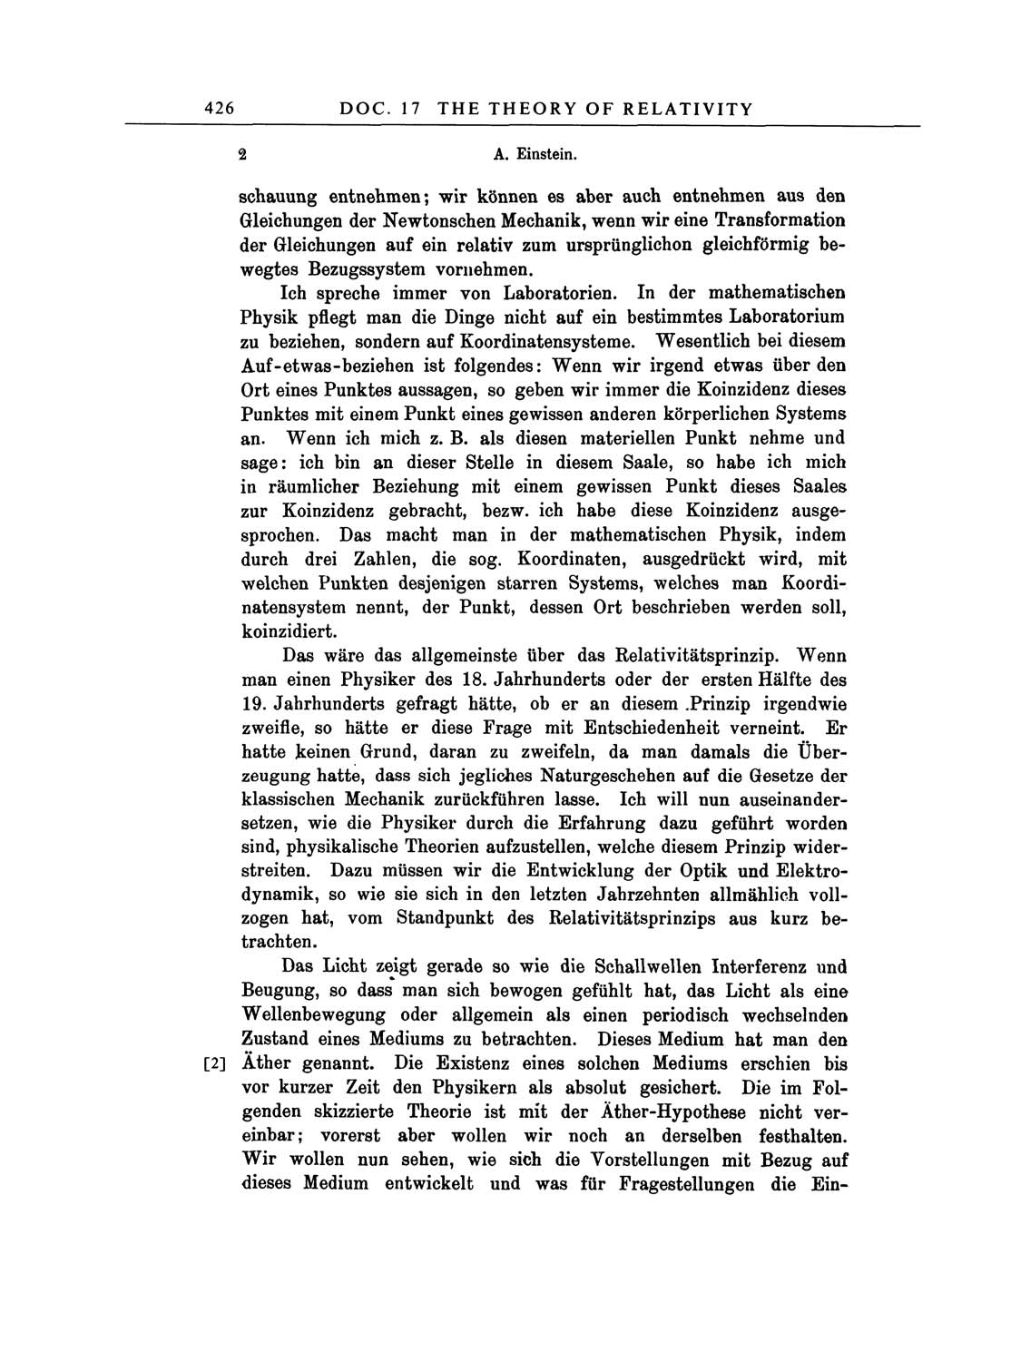 Volume 3: The Swiss Years: Writings 1909-1911 page 426